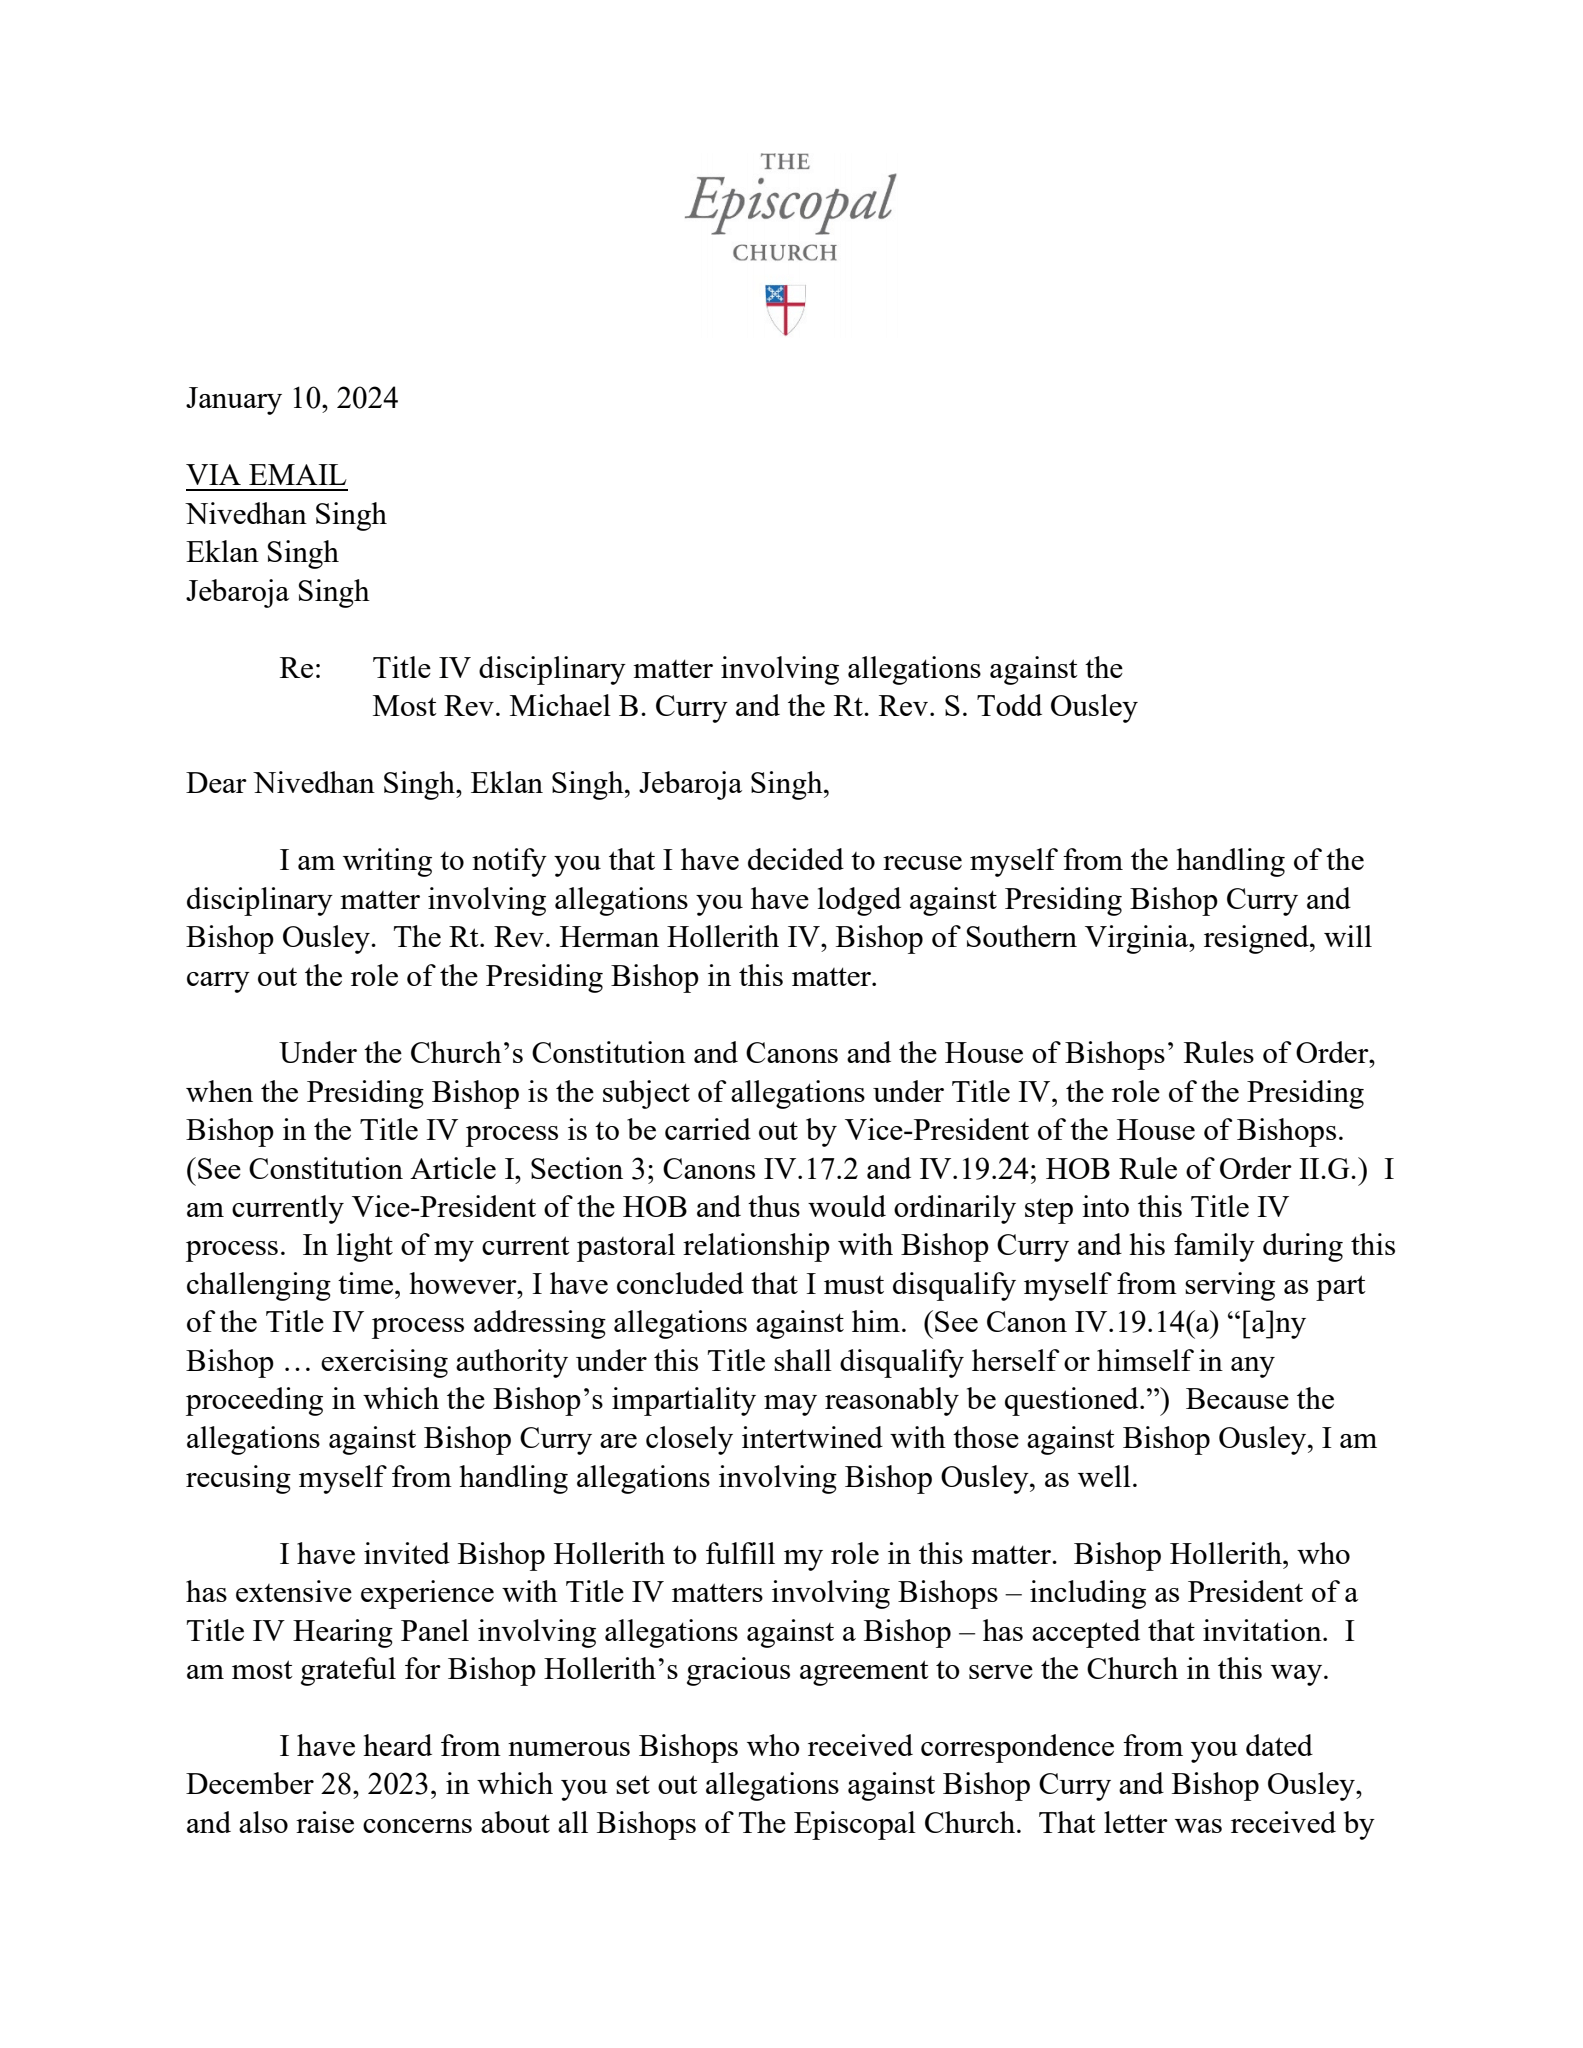 January 10, 2024 letter from Rt. Rev. Mary Gray-Reeves - Page 1